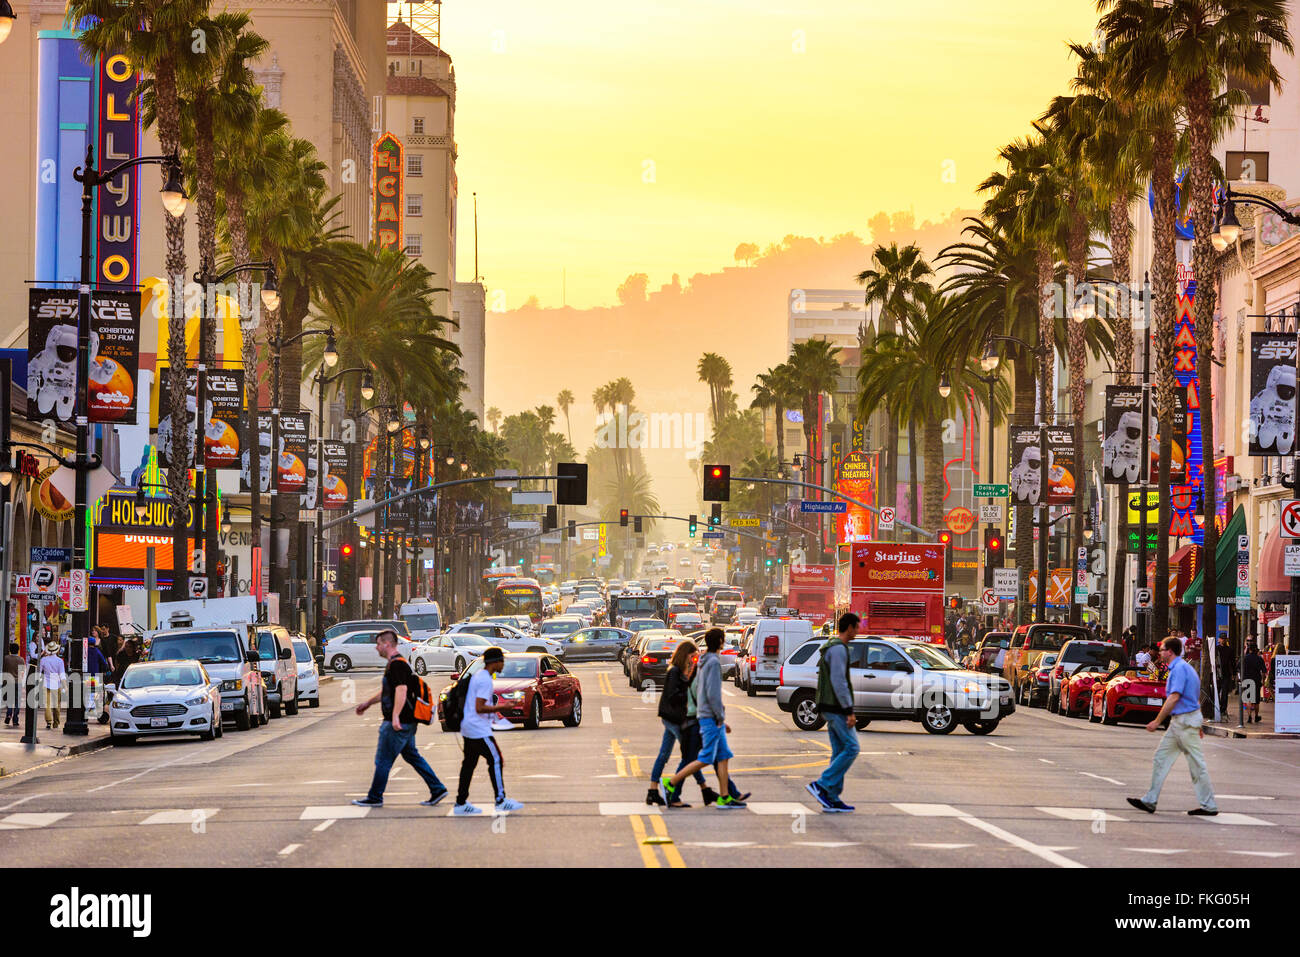 Traffic on Hollywood Boulevard in Hollywood, California, USA. Stock Photo